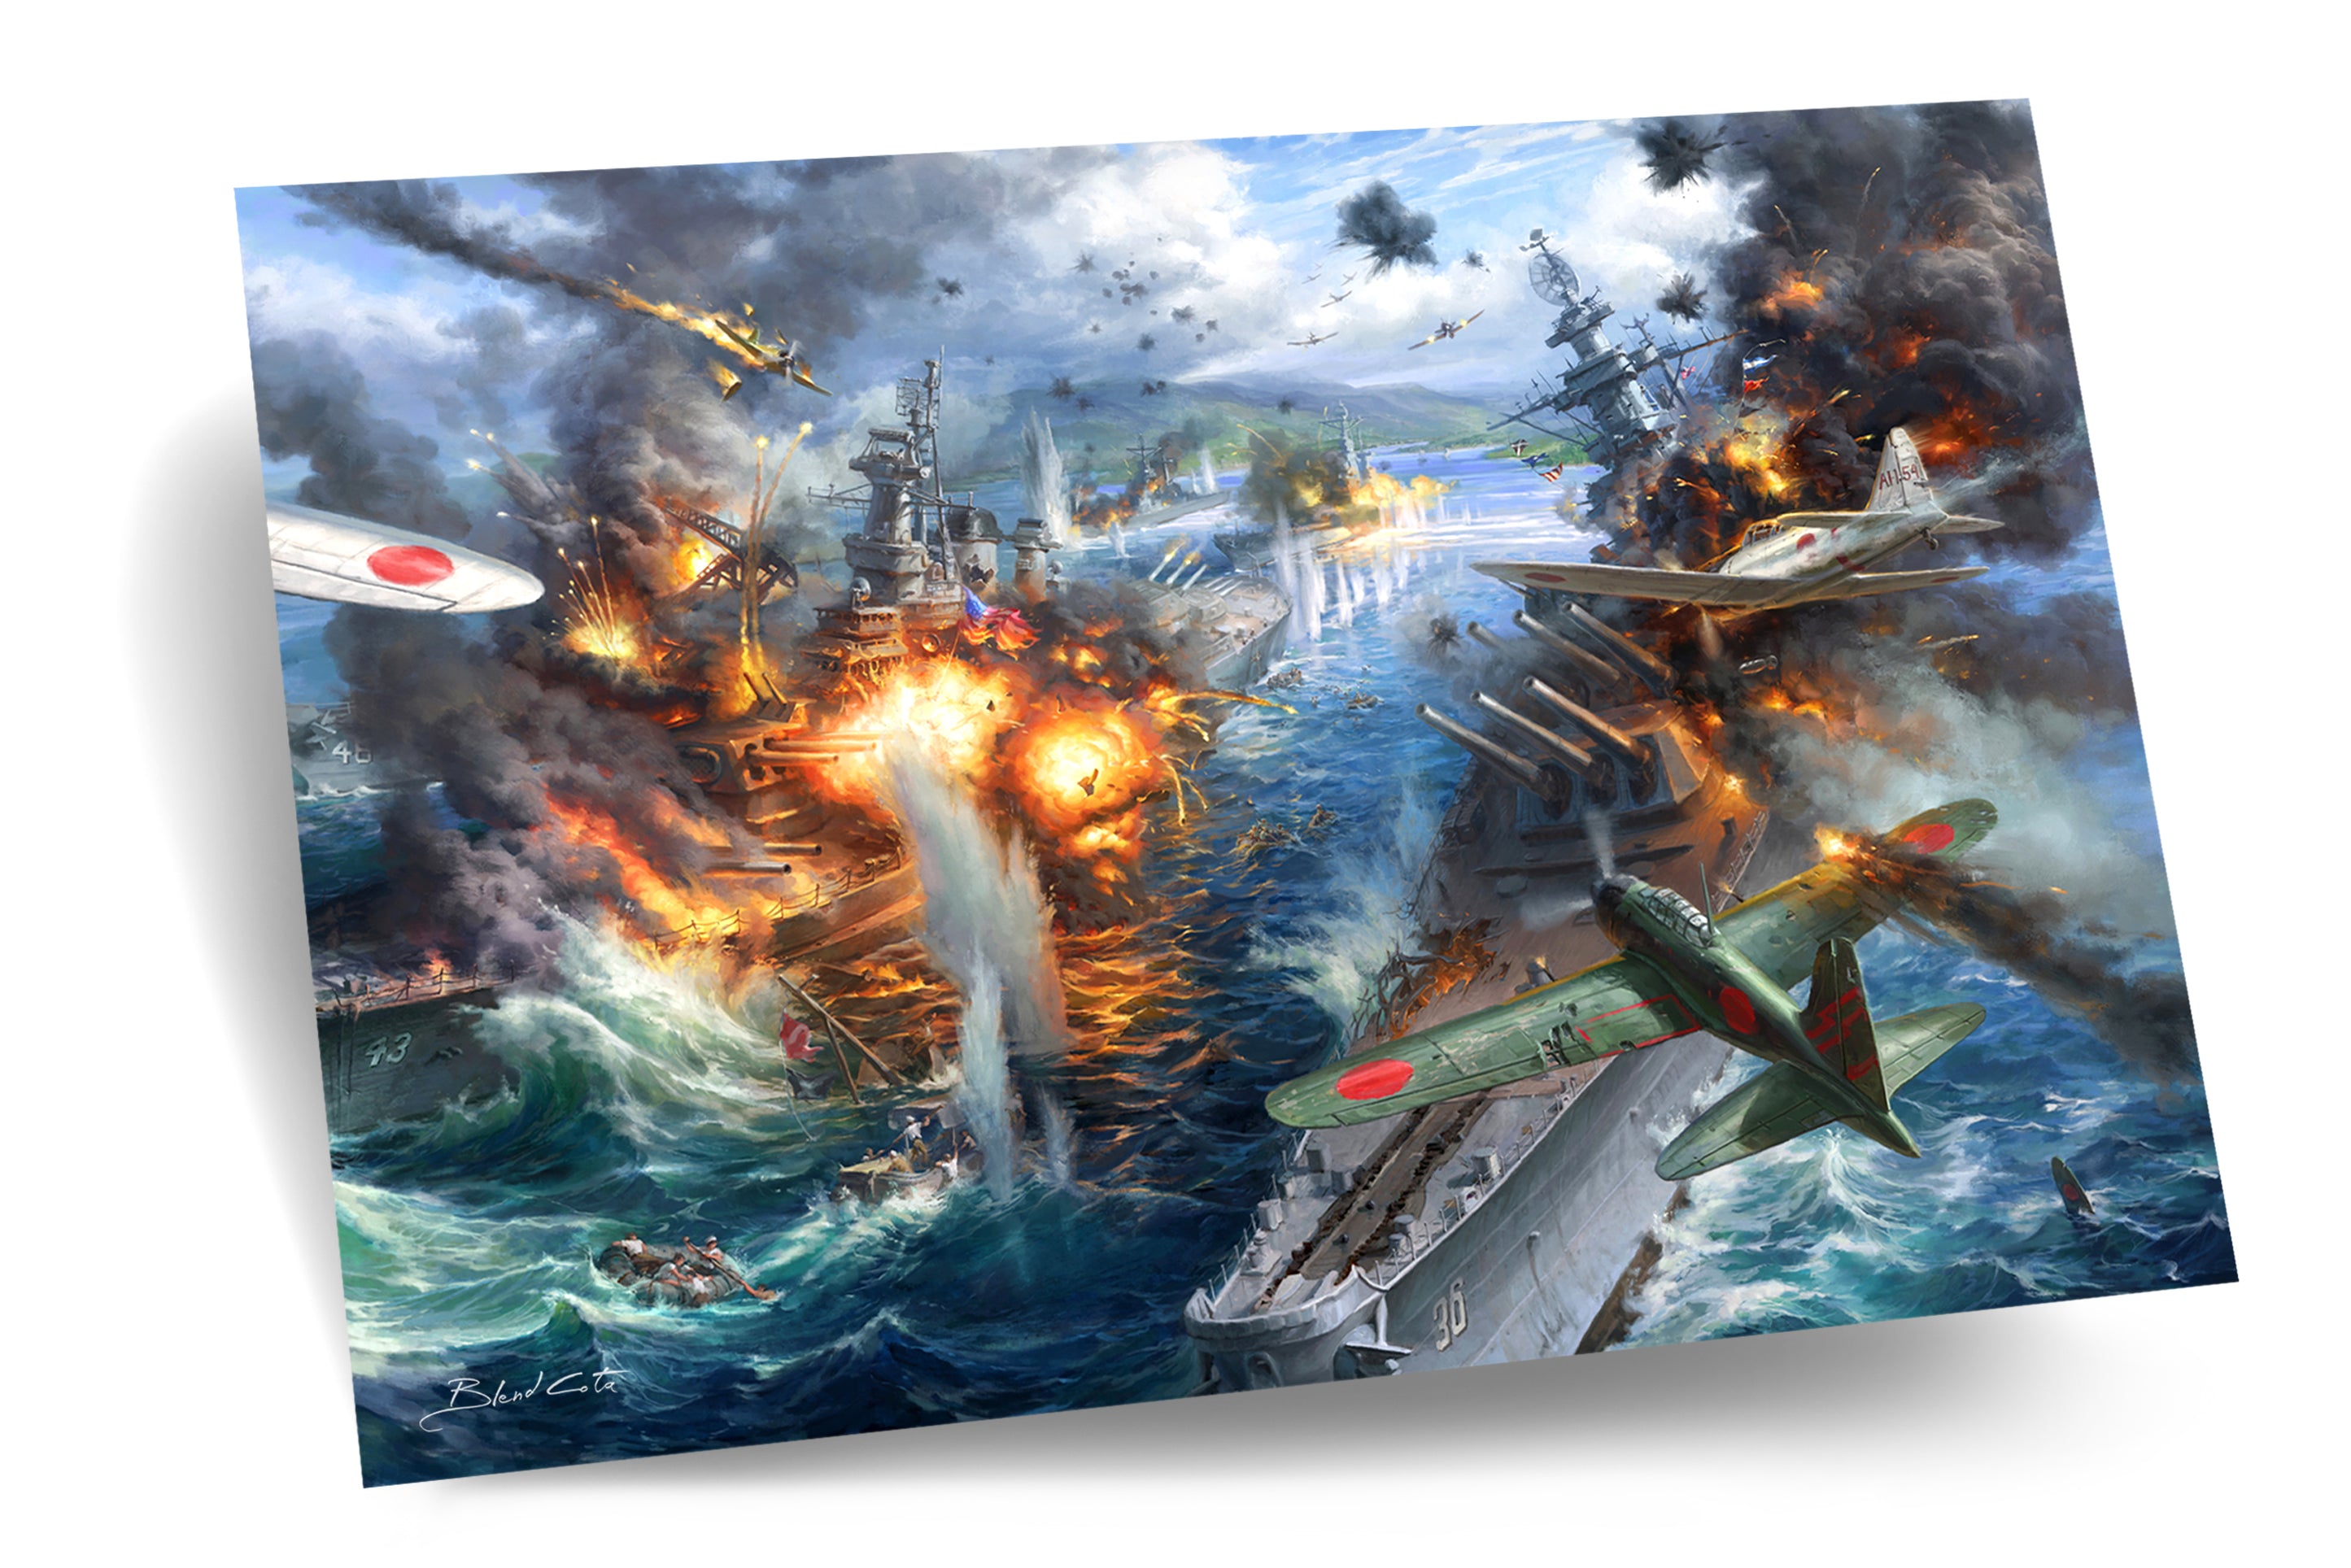 Wall art print of the attack on Pearl Harbor, Japanese planes bombing American vessels and battleships, on a background of destruction, smoke and fire, realism style with detailed brushstrokes on paper cardstock.